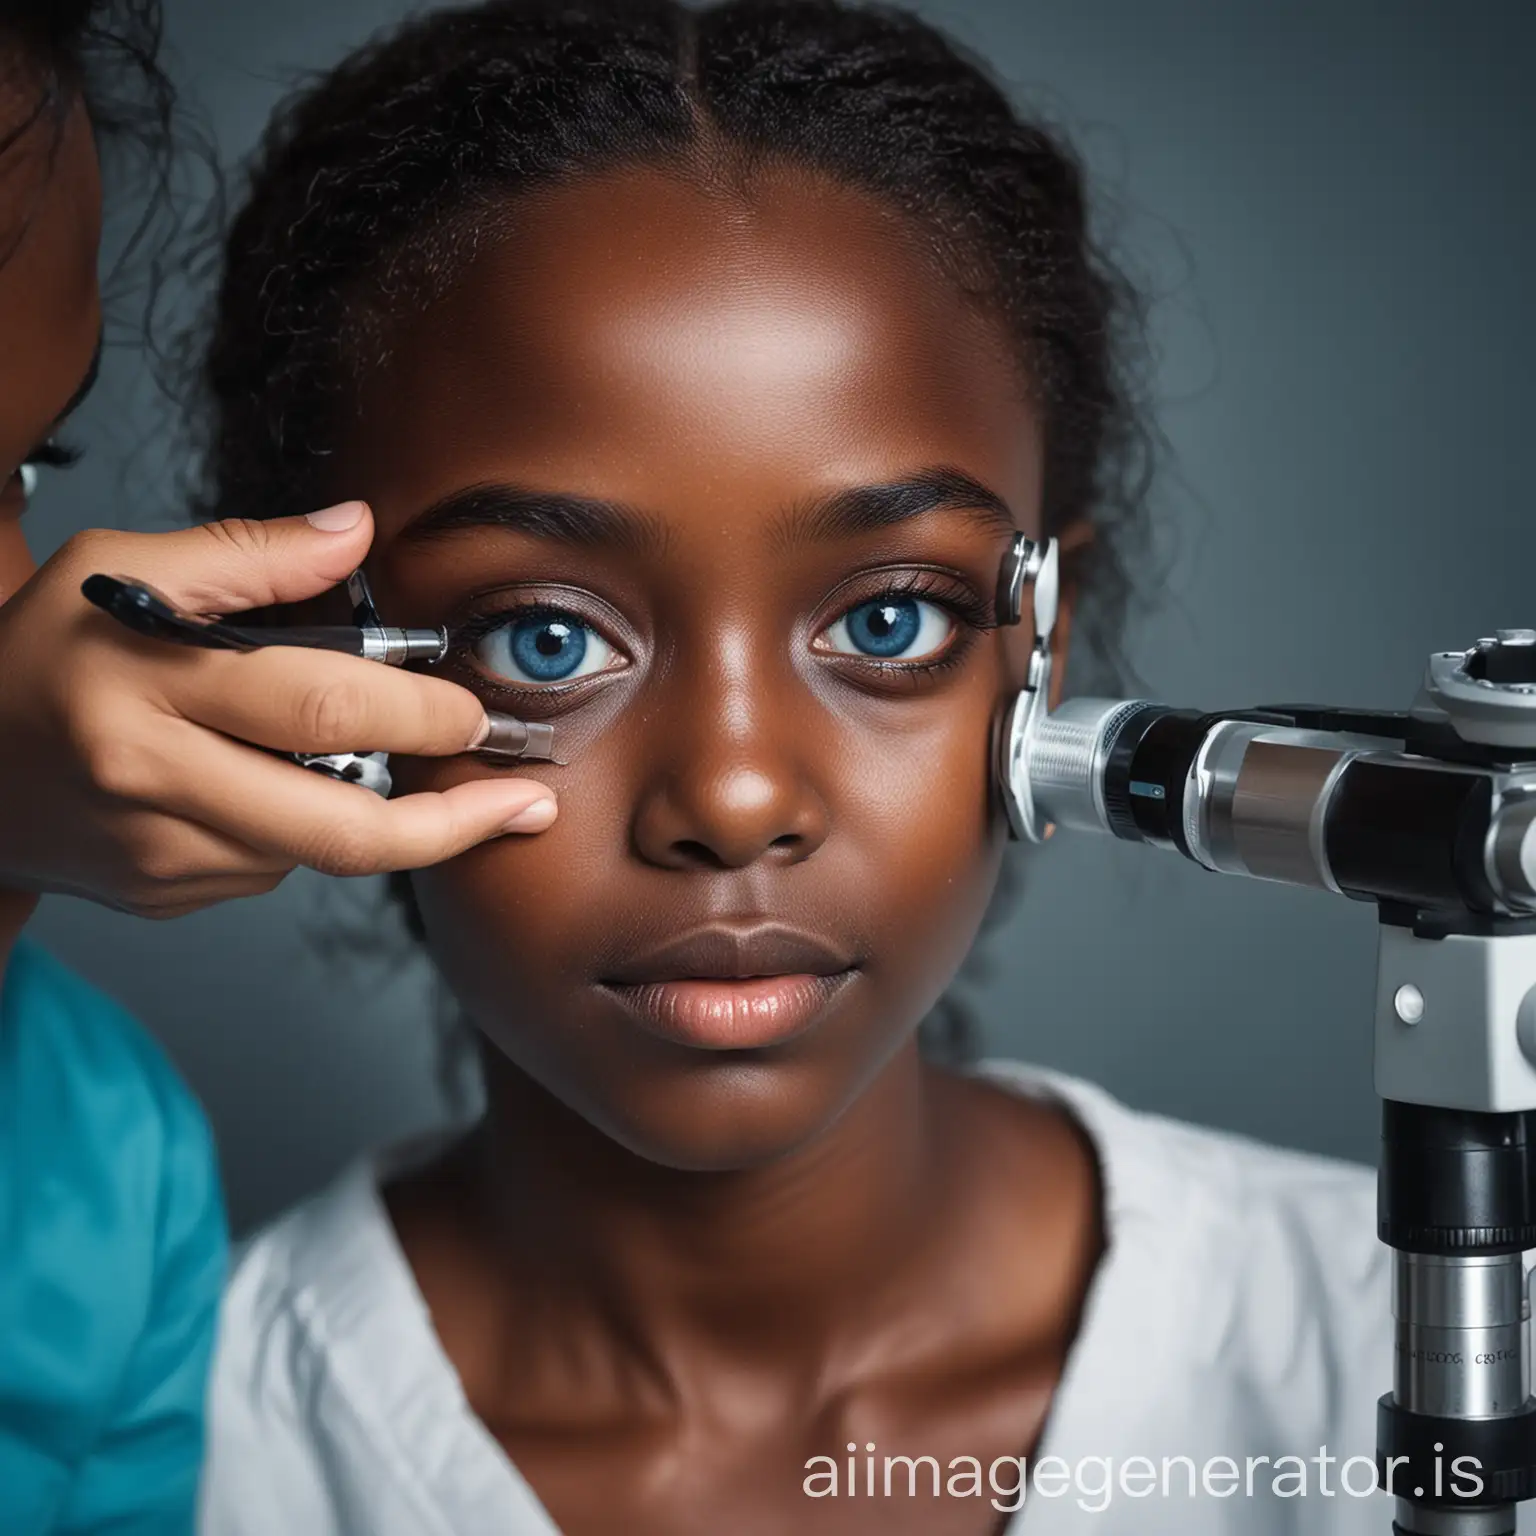 Dark skin black village girl with cataract(blue) being checked by doctor with an retinoscope (more focus on the girl)